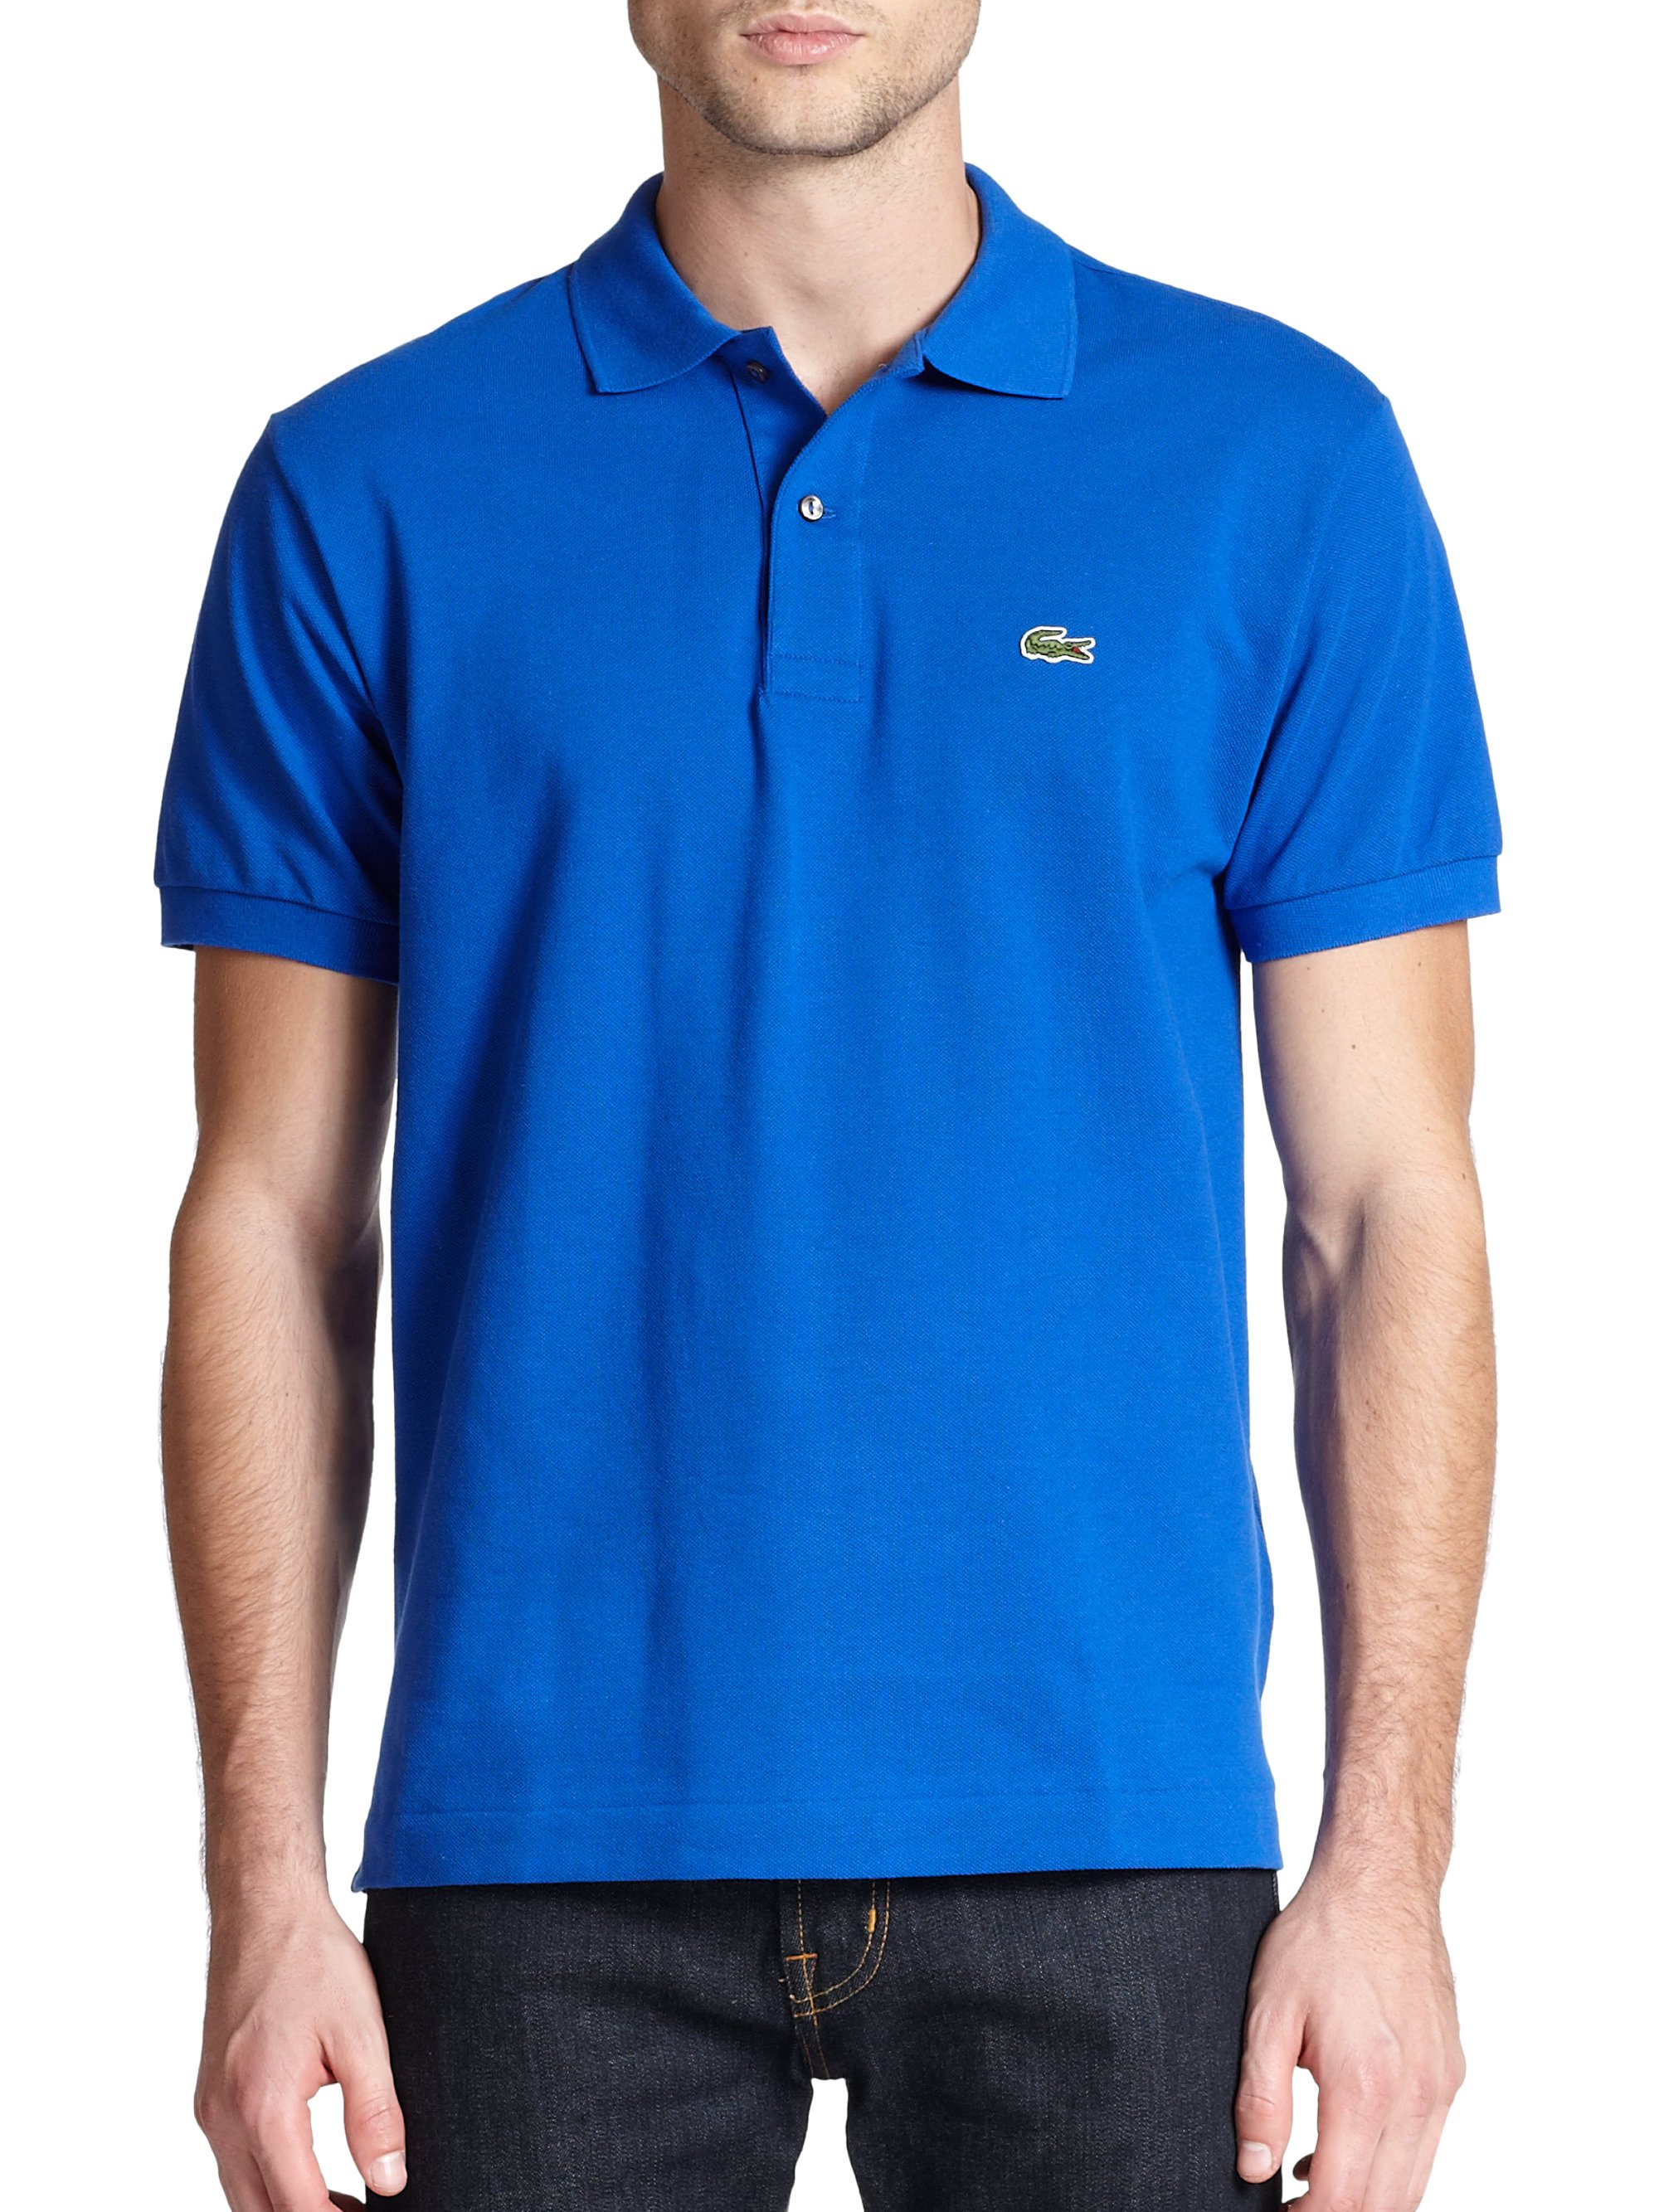 Lyst - Lacoste Classic Pique Polo in Blue for Men